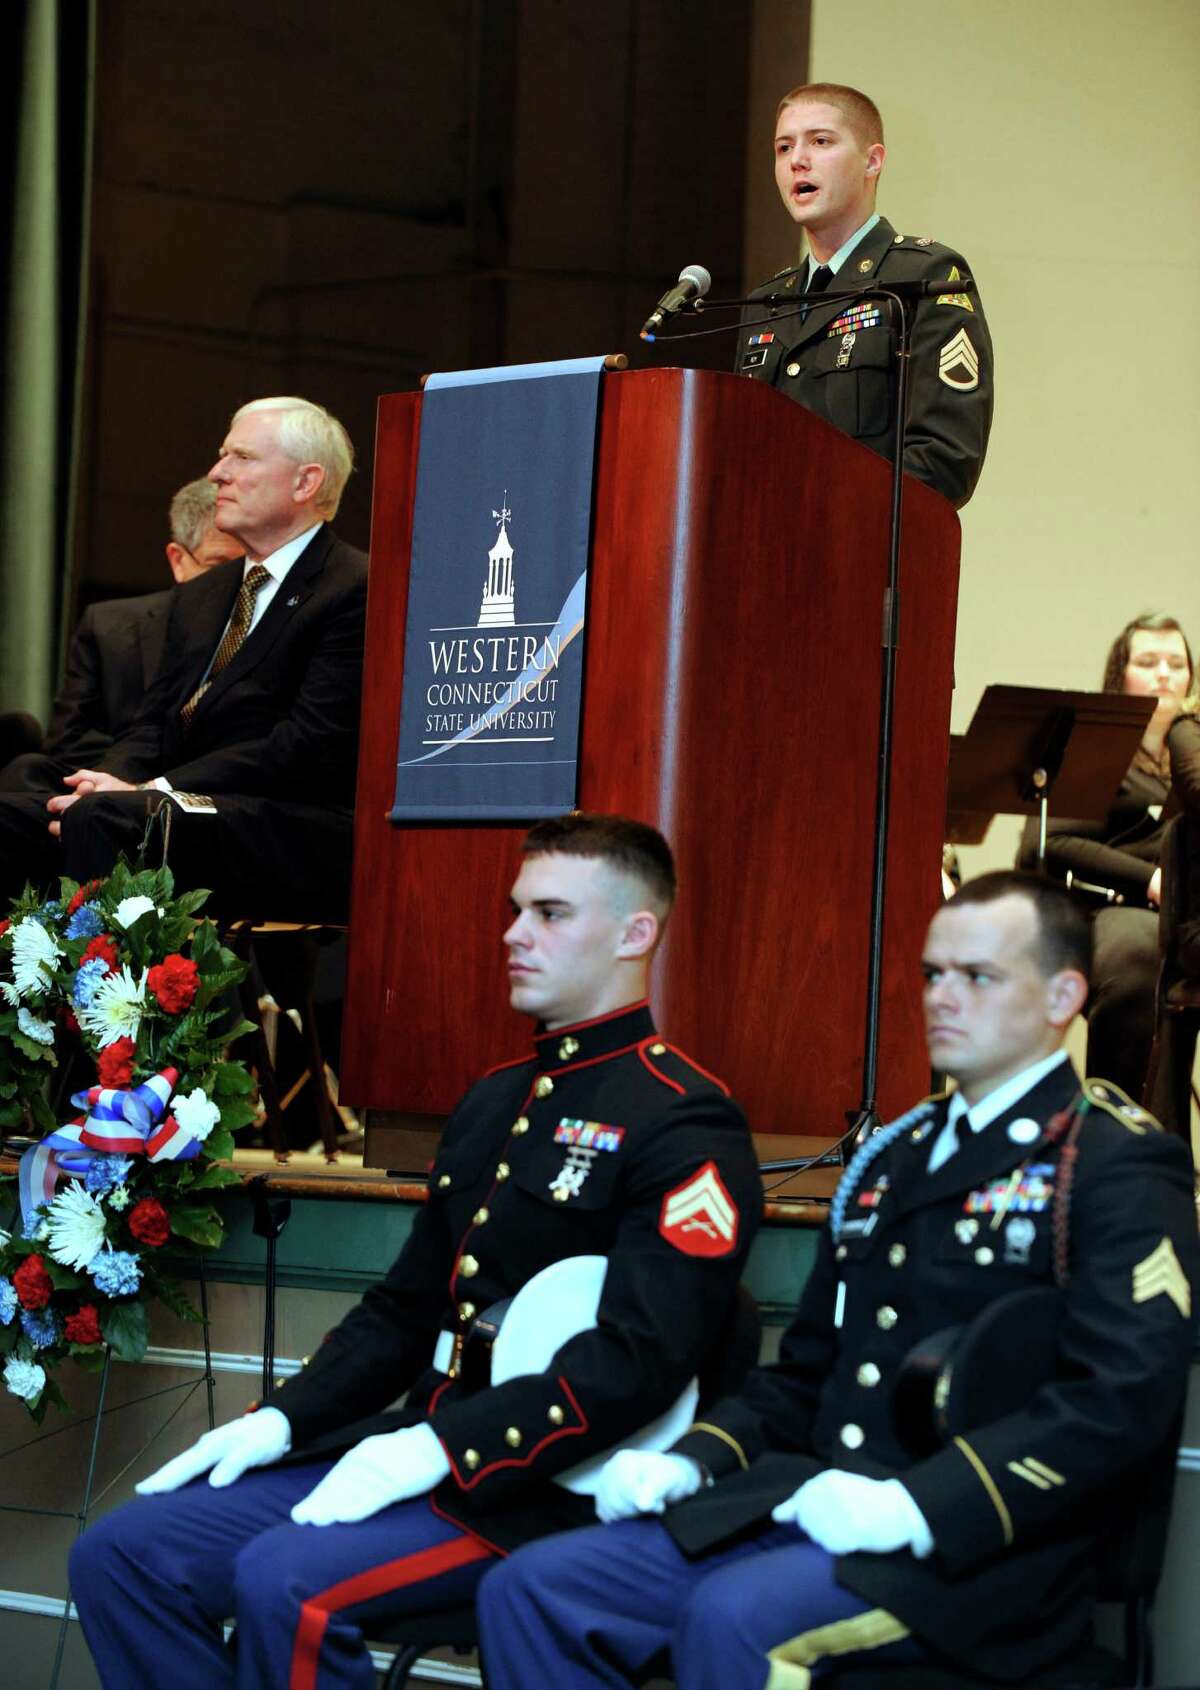 Derek B. Roy,staff sergeant with the Connecticut Army National Guard who is currently working on his MBA at Western Connecticut State University, speaks during the University's Veterans Day program Friday, Nov. 9, 2012. Seated in front are, David Curtis, 23, of Bethel, right, who is in the Marine Corps., and John Cummings, 26, with the Army National Guard.